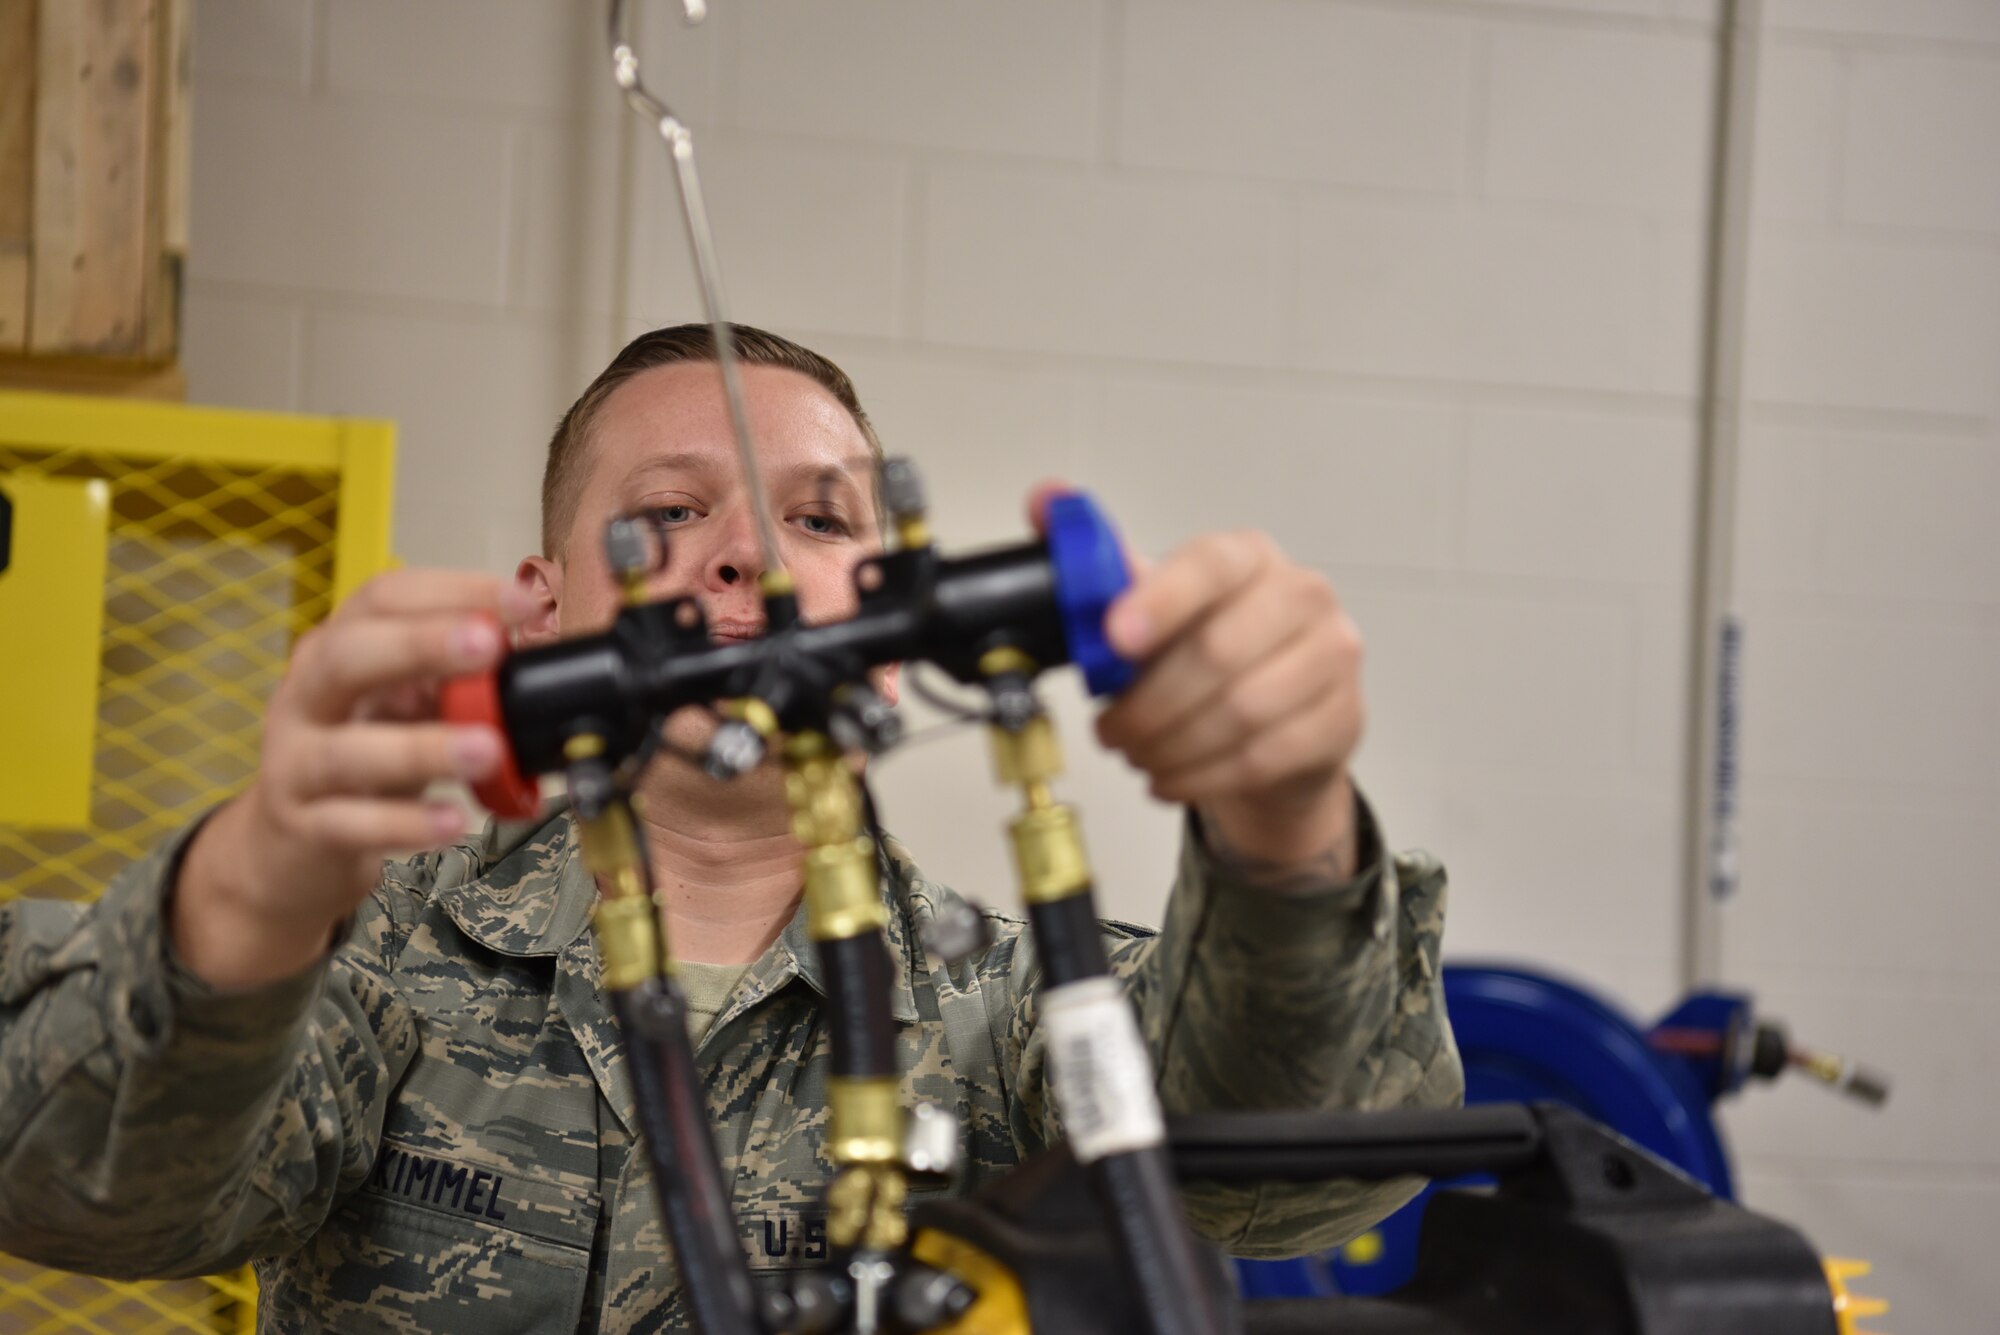 Staff Sgt. Ben Kimmel, 90th Maintenance Group power refridgeration and electrical production supervisor, puts together equipnment to service a brine chiller Dec. 17, 2018, at F.E. Warren Air Force Base, Wyo. These brine chillers are powerful air conditioners used in Missiler Alert Facilities and are critical due to the high temperatures put off by various equipnment in a MAF. (U.S. Air Force photo by Senior Airman Abbigayle Williams)